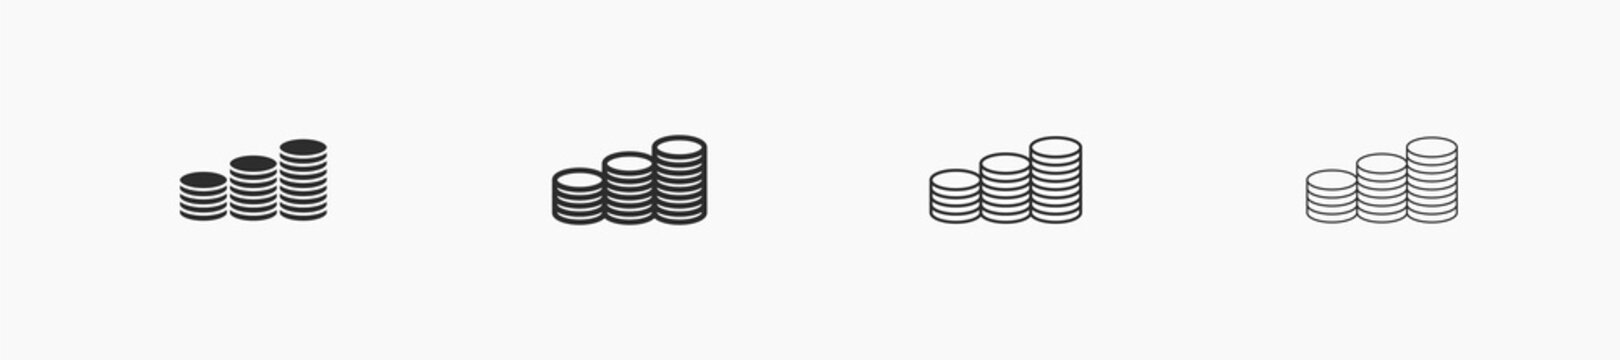 Flat stack of coins vector illustration. Salary and payment template for business and credit. Black outlines and editable stroke. Stack of coins illustration design